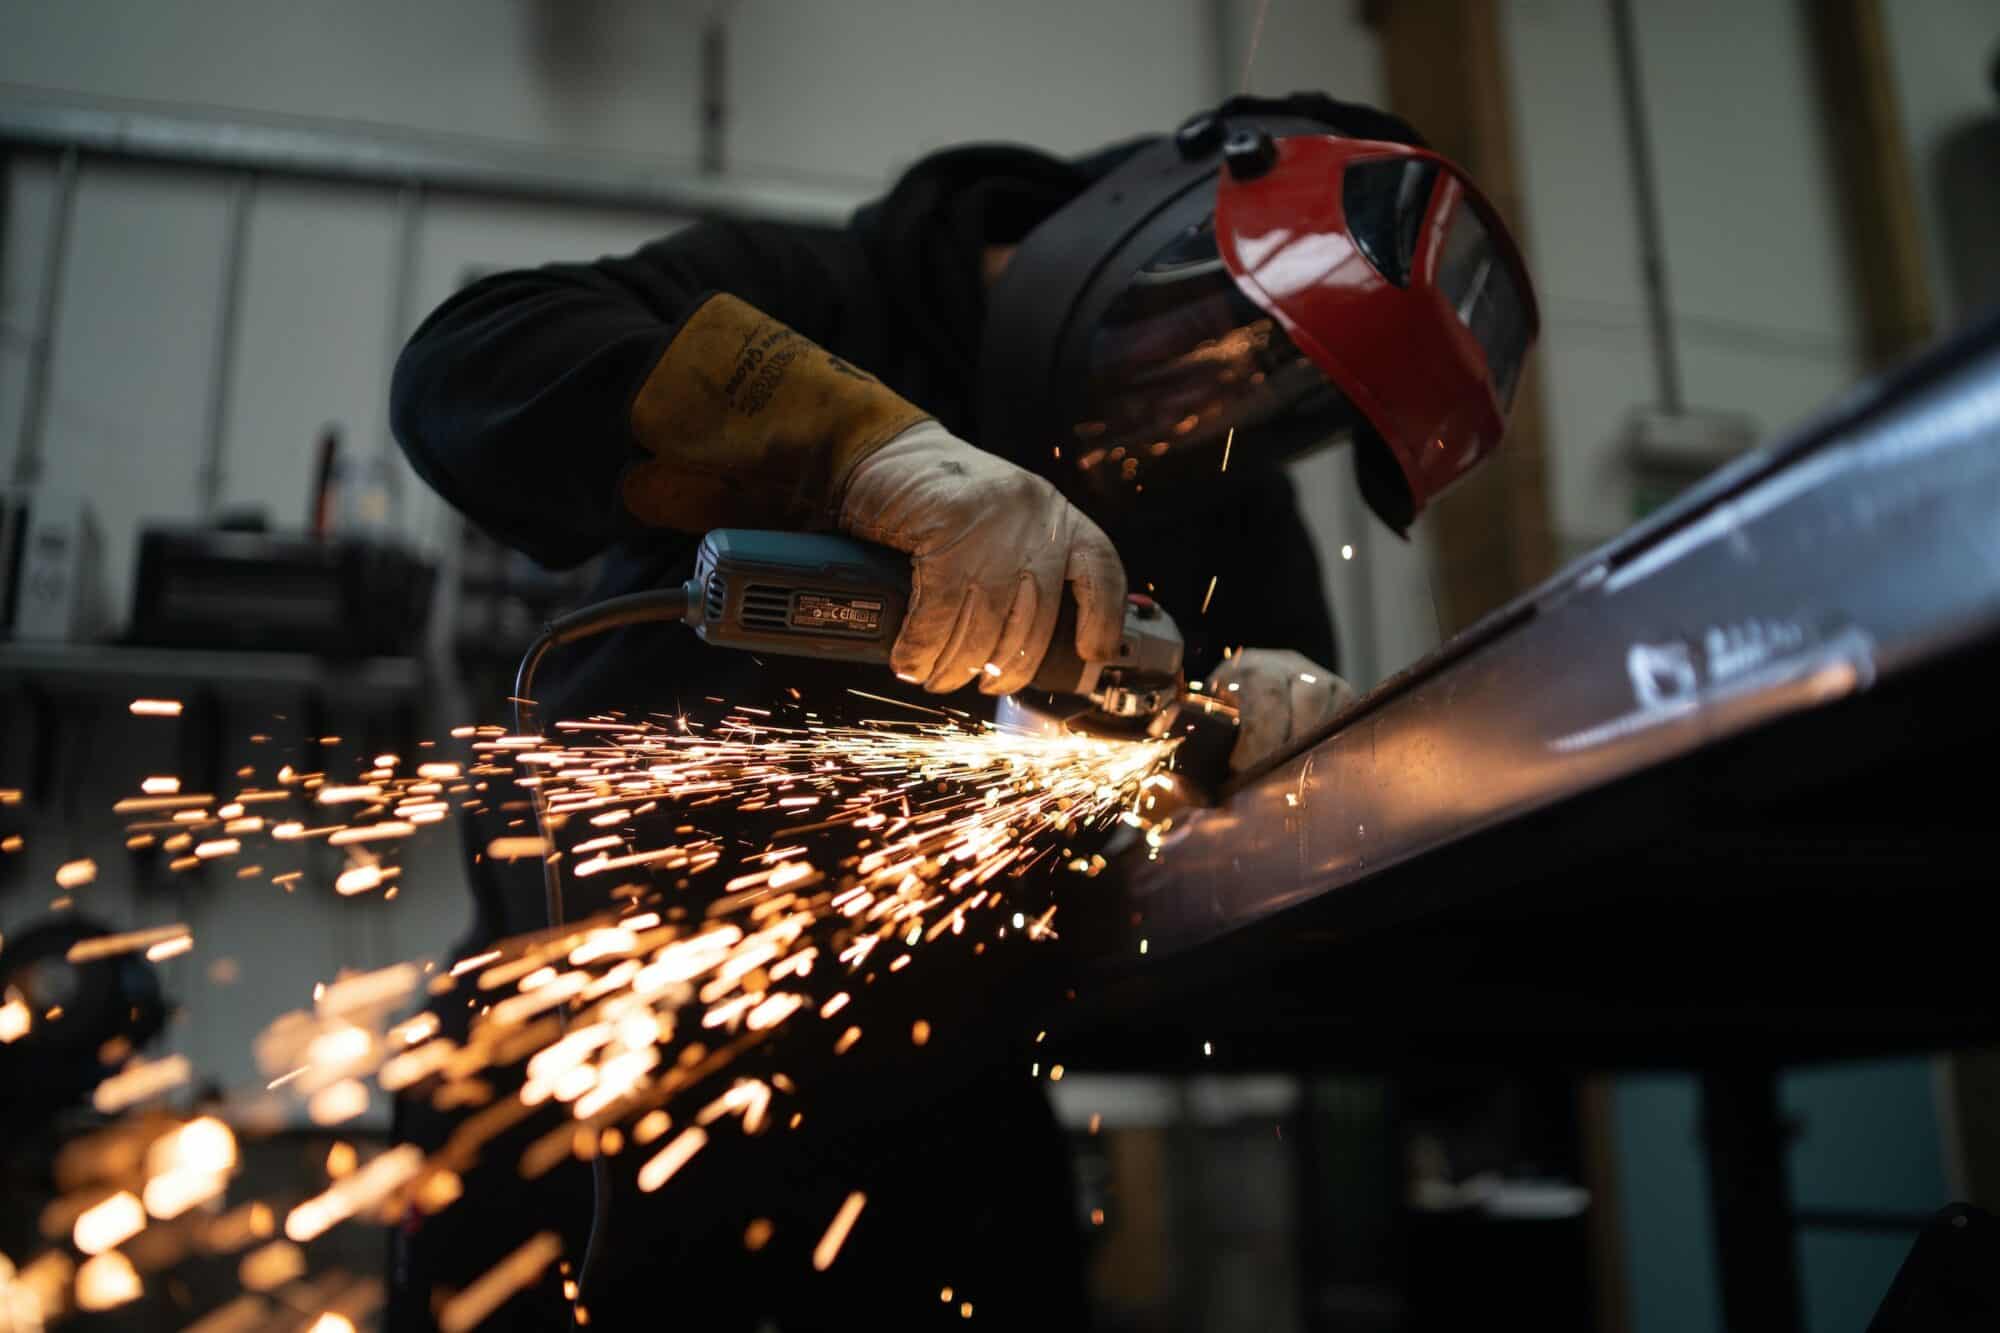 A worker assembles metal in a factory amid sparks emanating from their tool.